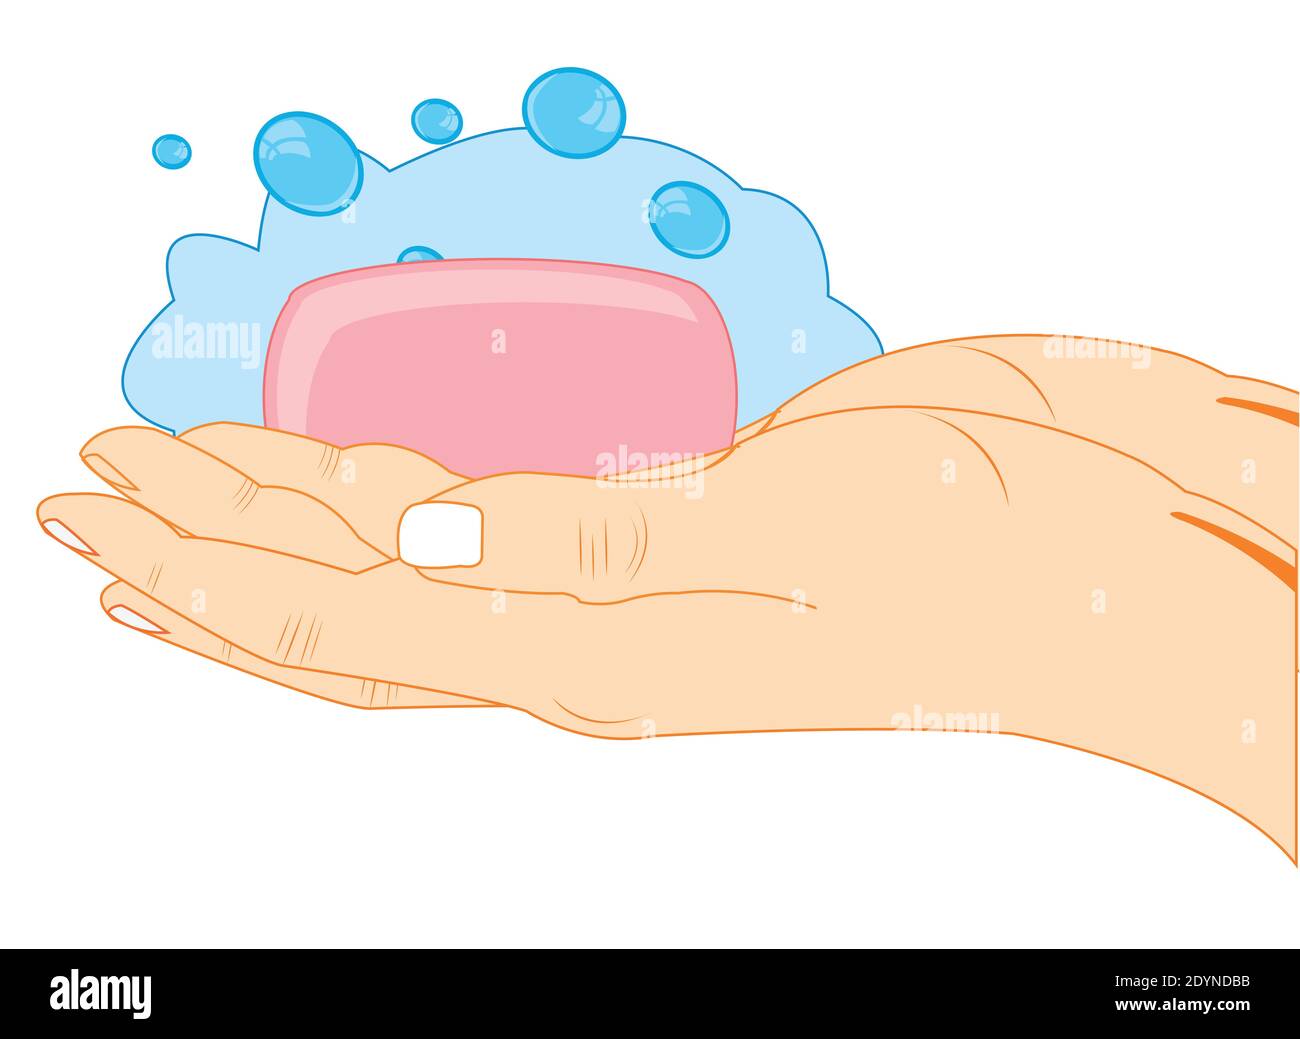 Vector illustration of the hands of the person washing hands with soap Stock Vector